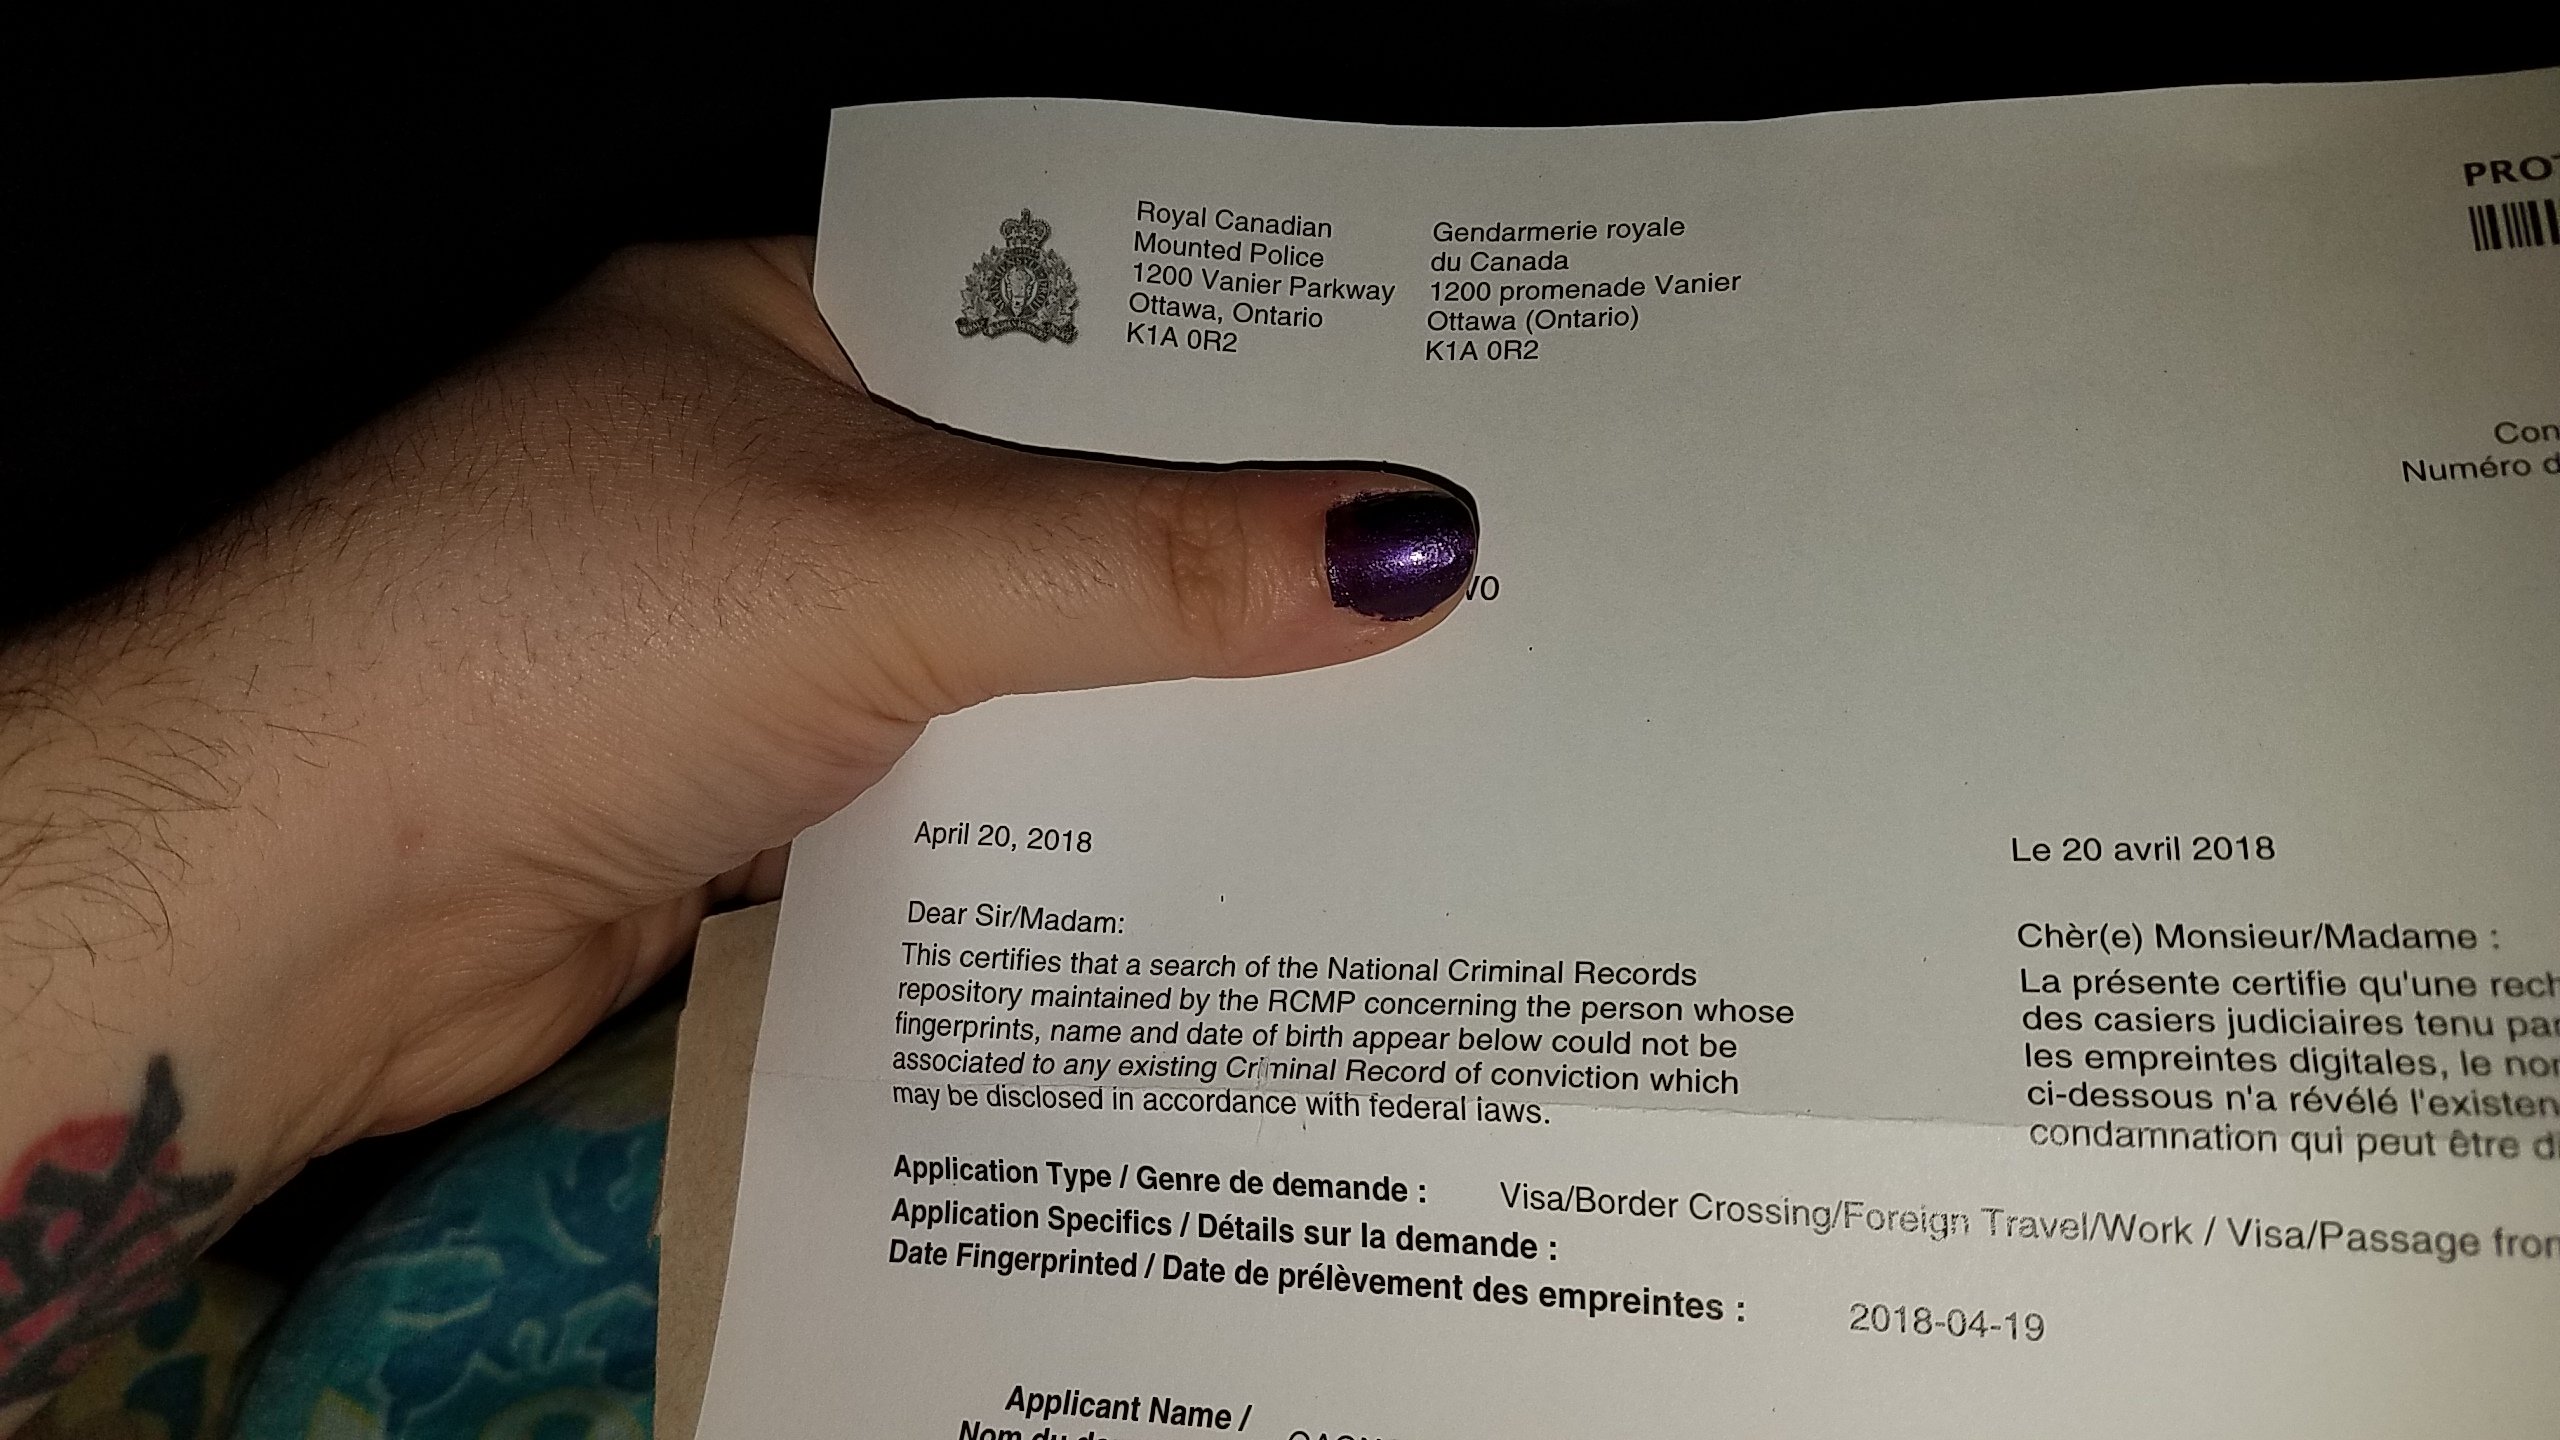 Police Certificate Montreal Canada HELP